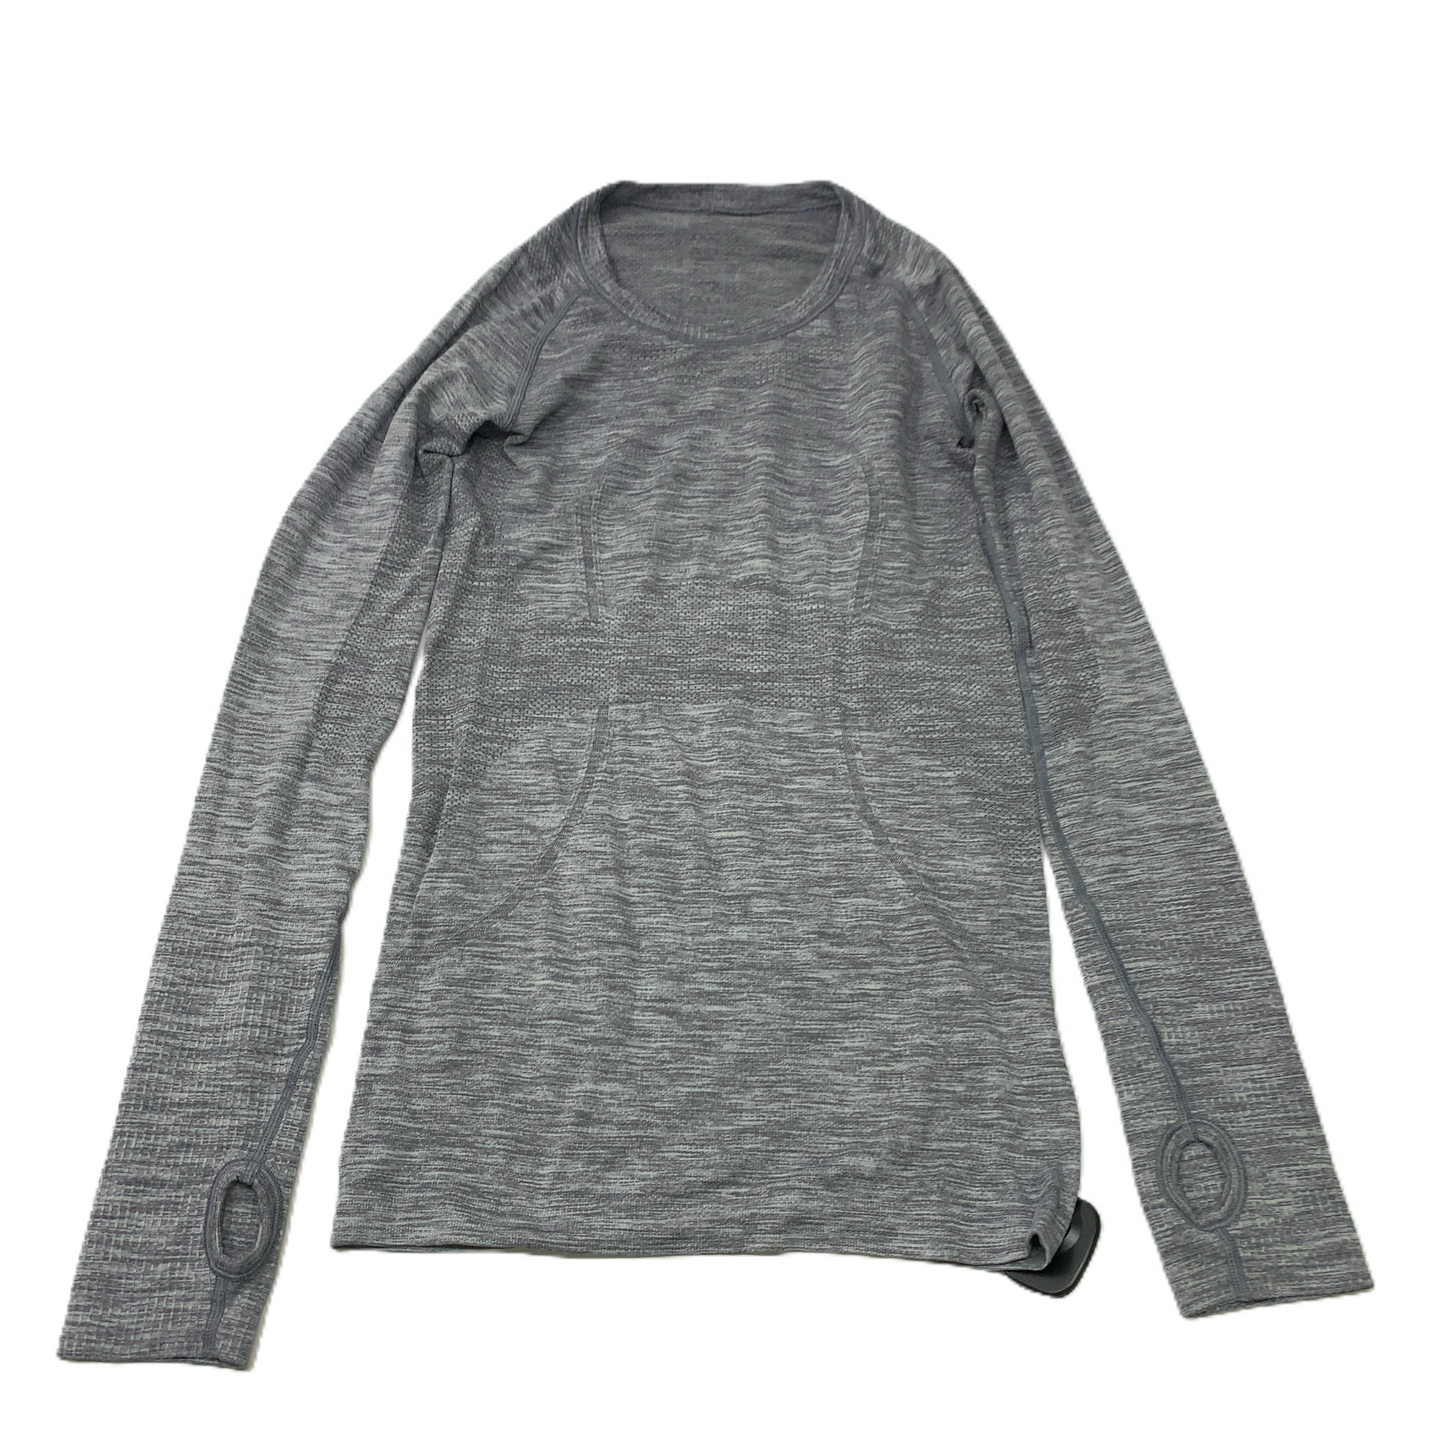 Grey  Athletic Top Long Sleeve Collar By Lululemon  Size: S